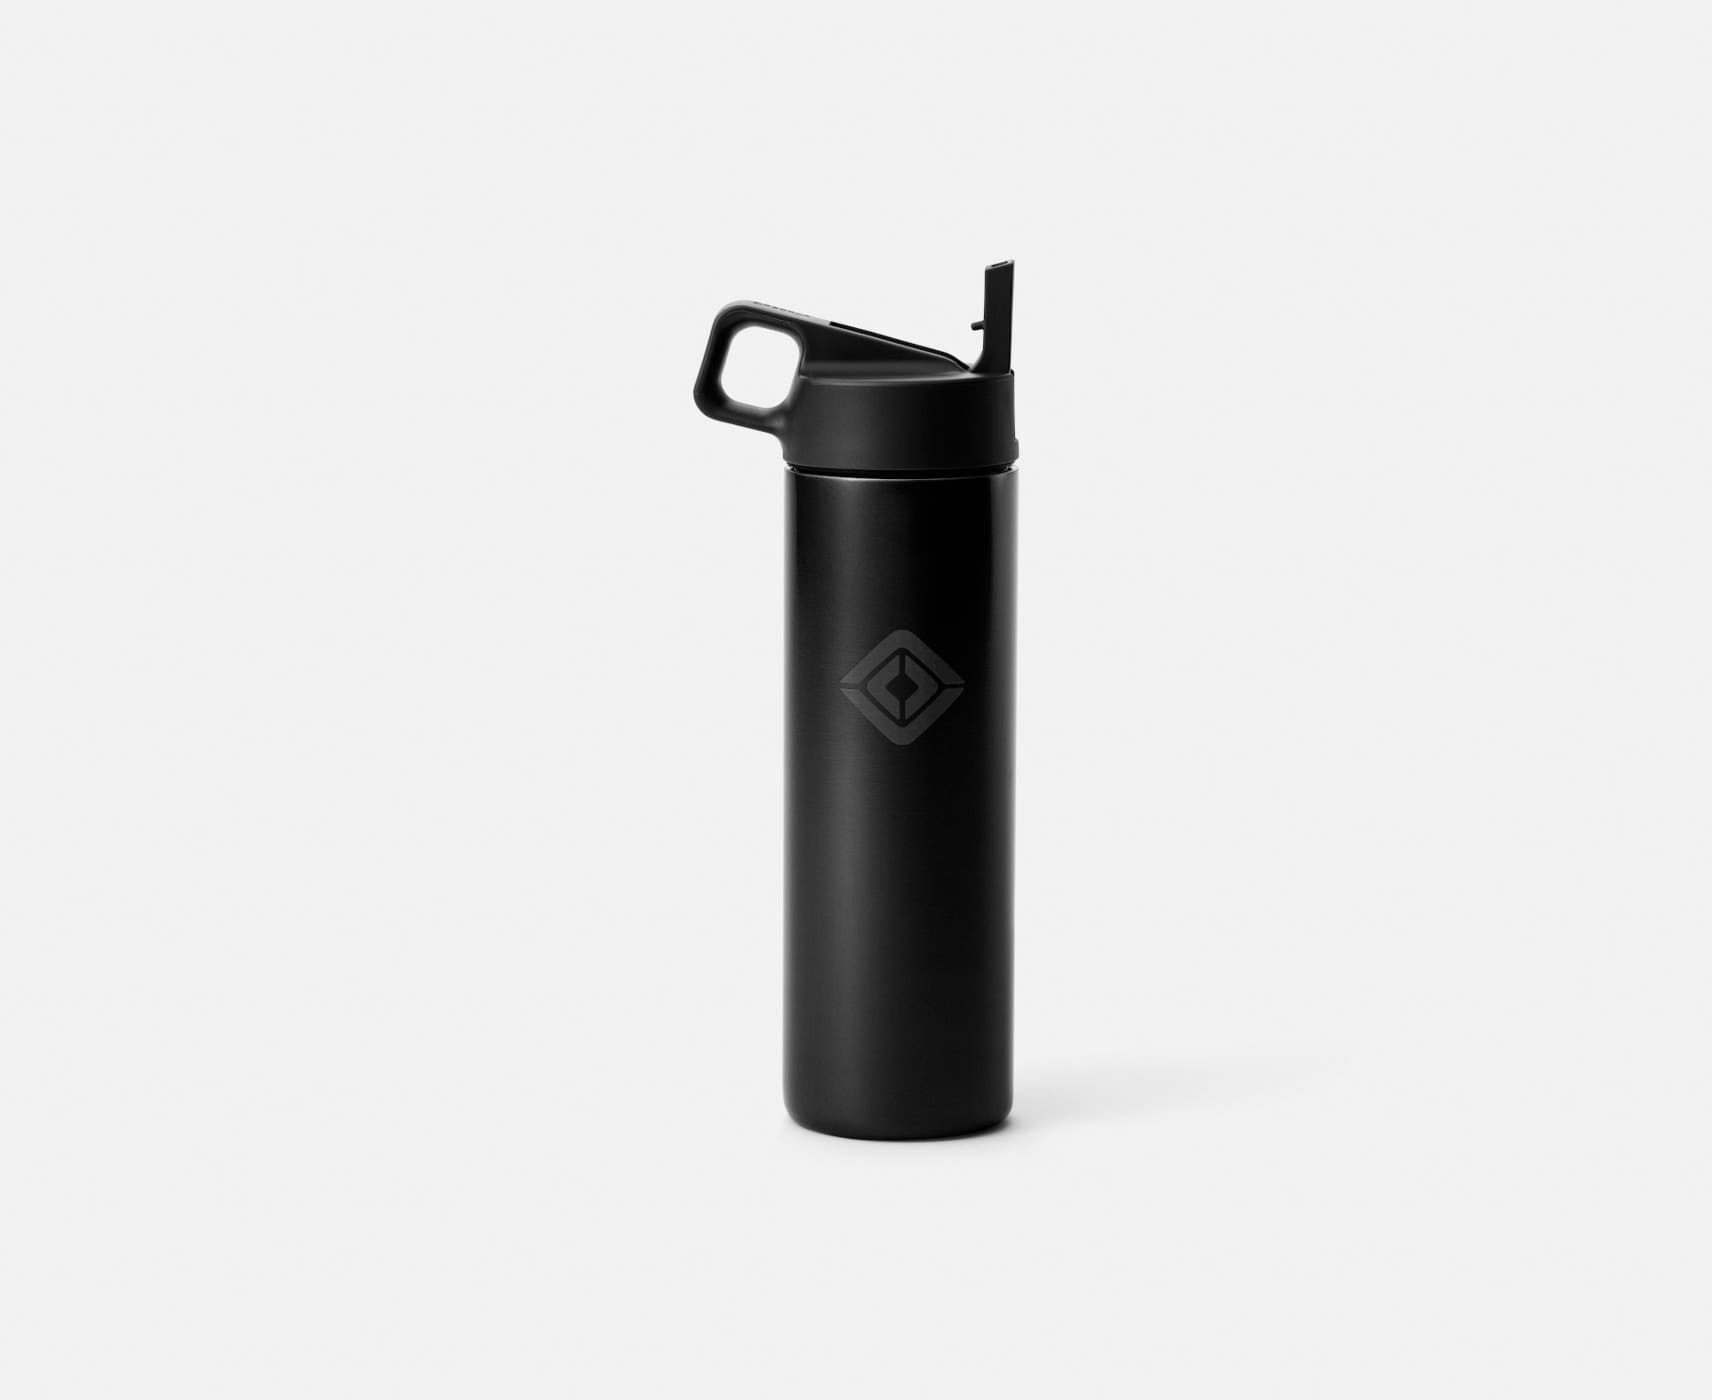 https://media.rivian.com/rivian-main/image/upload/f_auto,q_auto:eco/v1/rivian-com/gearshop/20%20oz%20Wide%20Mouth%20Bottle%20with%20Straw/Midnight/20-oz-Wide-Mouth-Midnight-Primary-01_py31kb